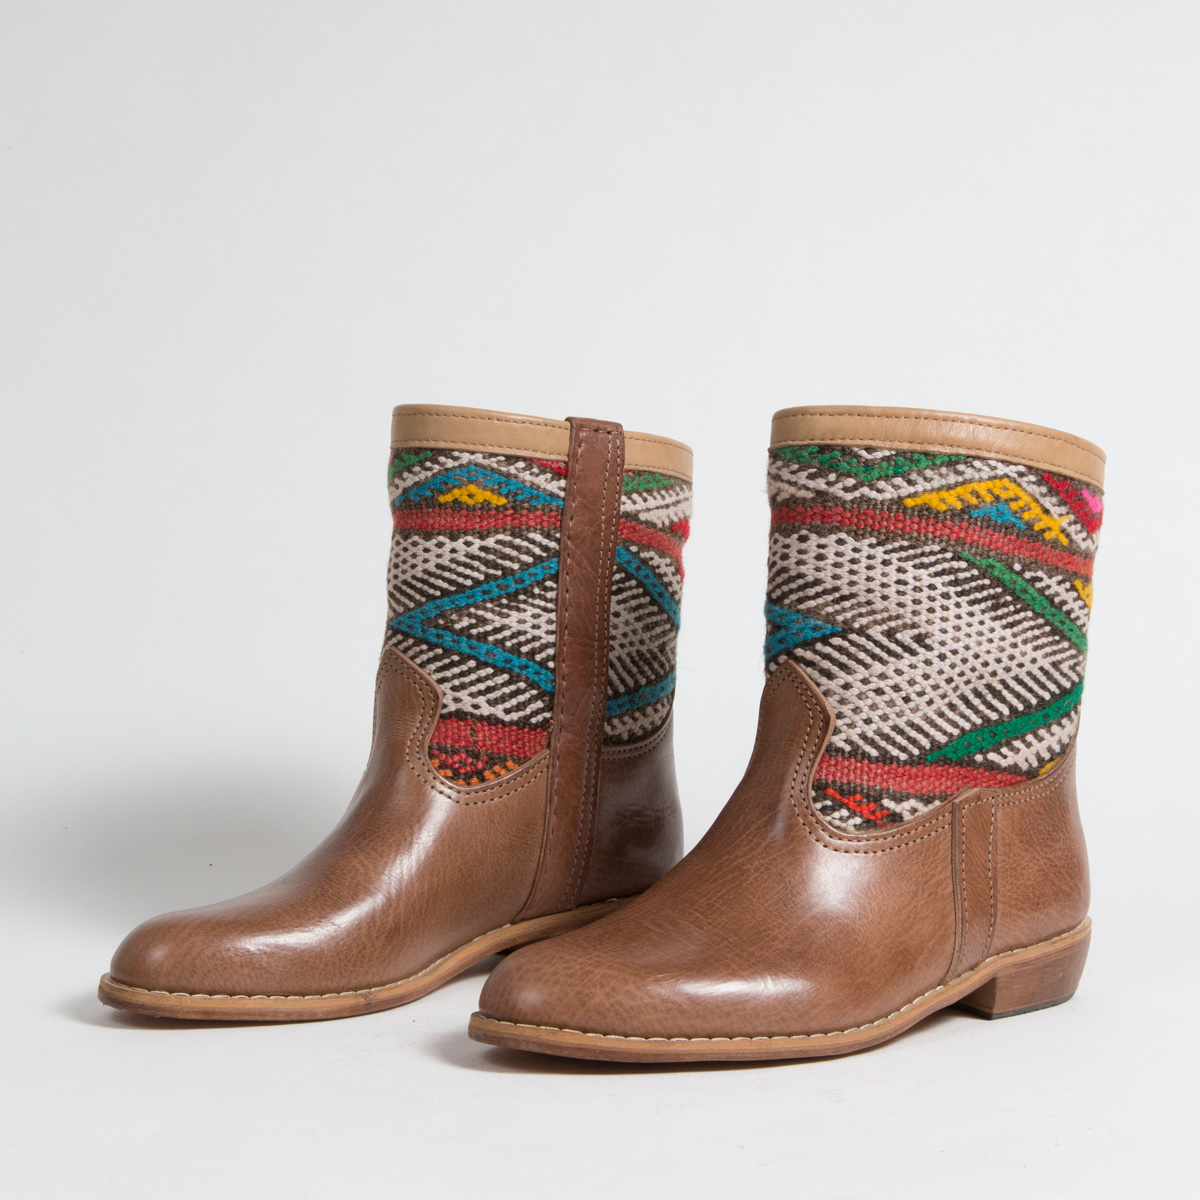 Bottines Kilim cuir mababouche artisanales (Réf. MCH4-39)